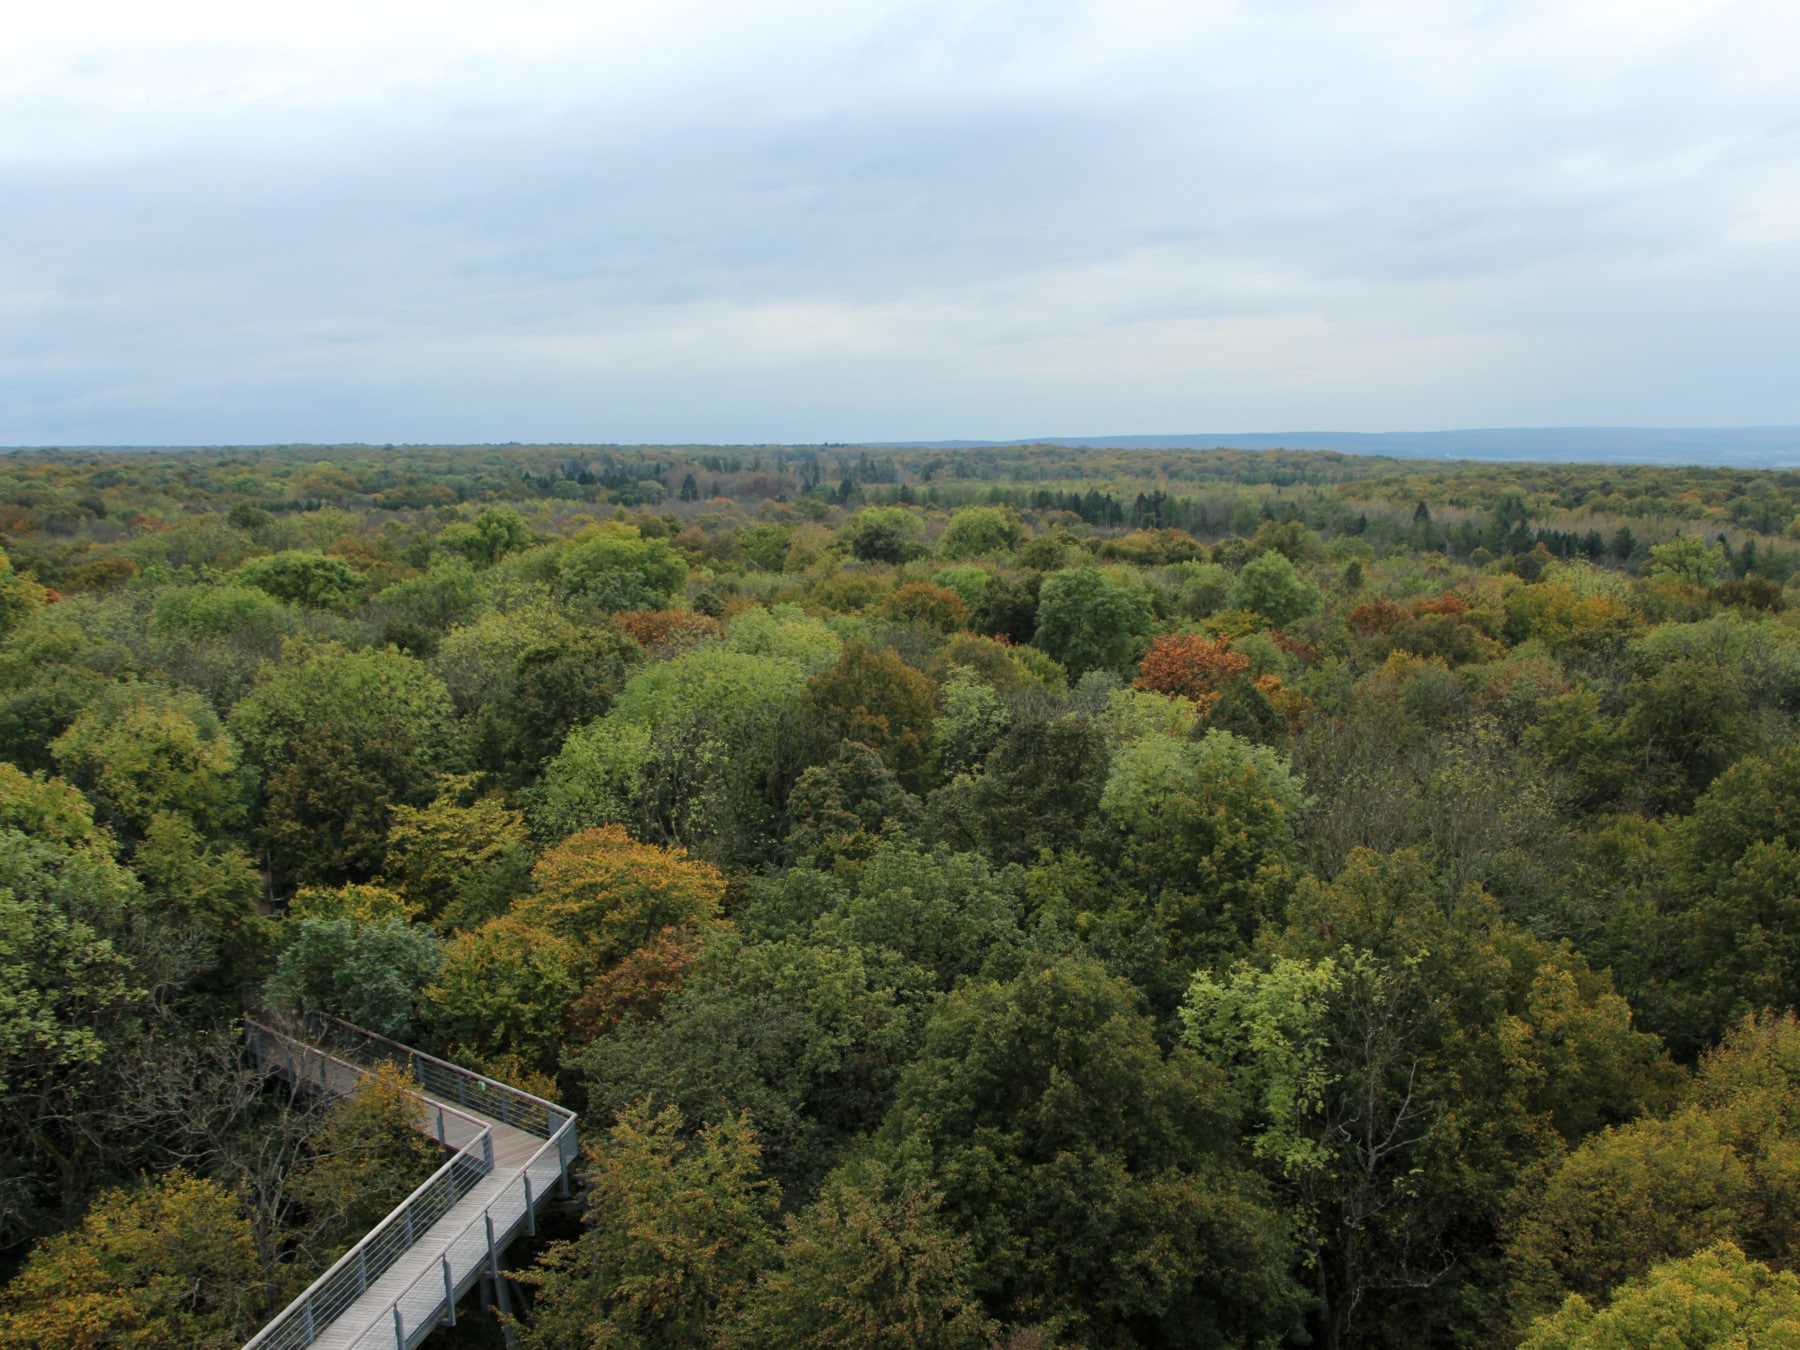 Picture: The photo shows a panoramic view over the treetops of the forest in the Hainich National Park. At the bottom right, a part of a treetop path built on stilts can be seen.